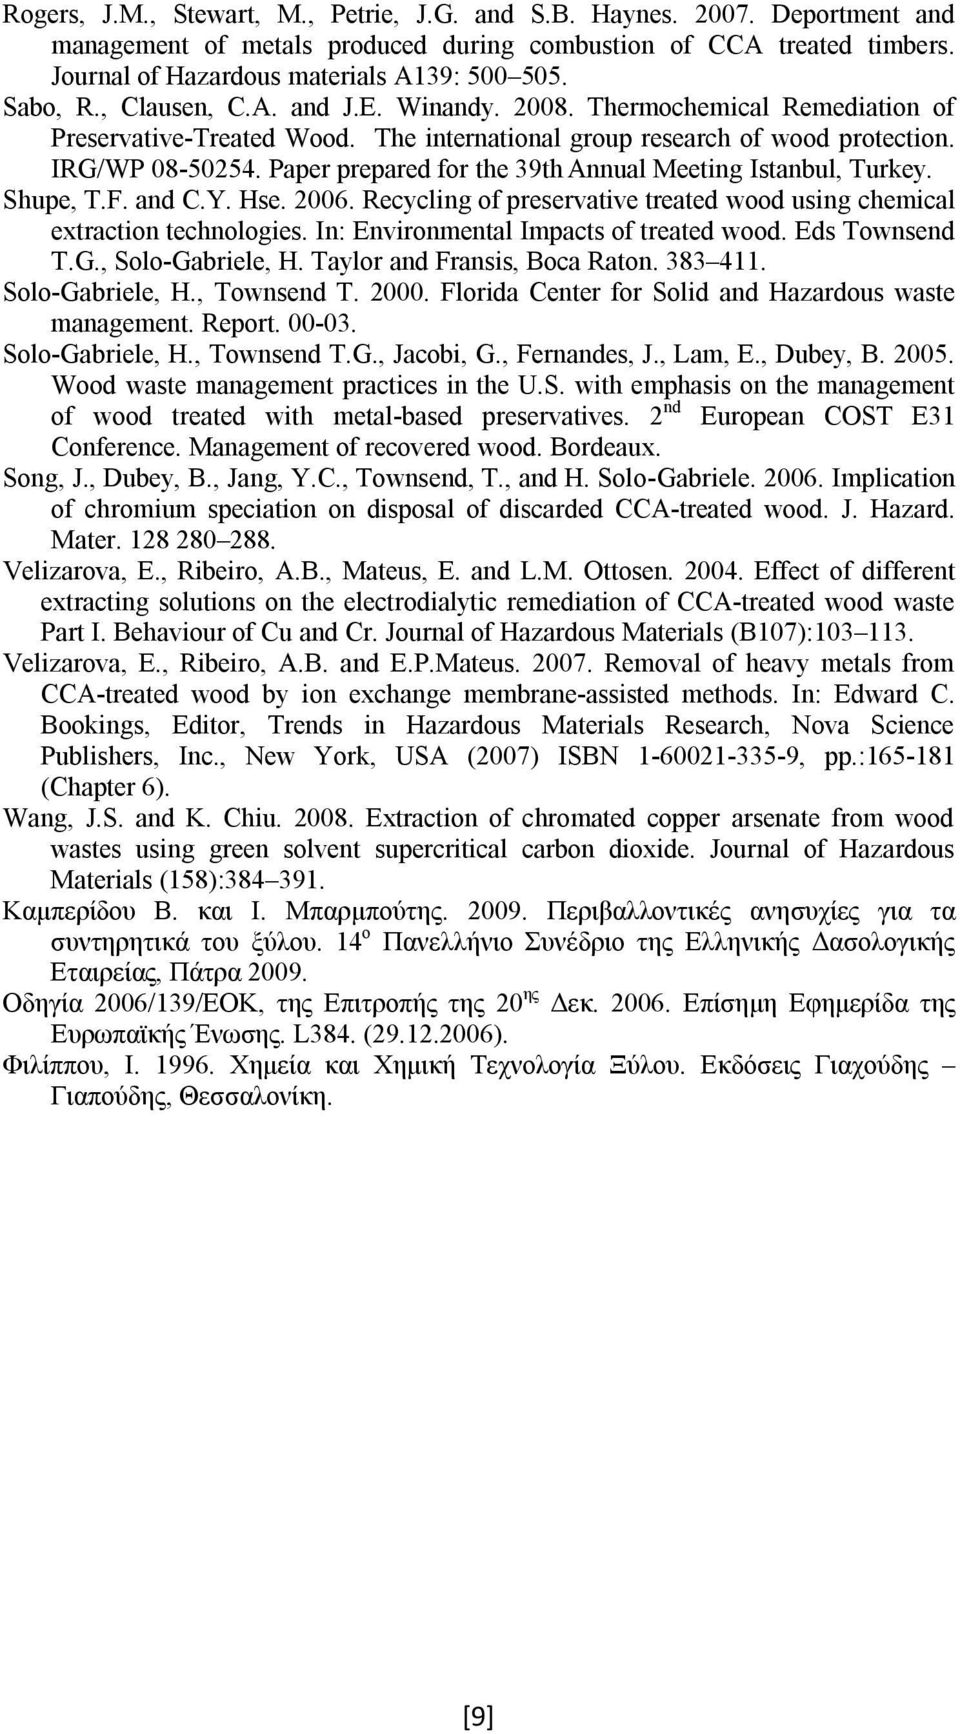 Paper prepared for the 39th Annual Meeting Istanbul, Turkey. Shupe, T.F. and C.Y. Hse. 2006. Recycling of preservative treated wood using chemical extraction technologies.